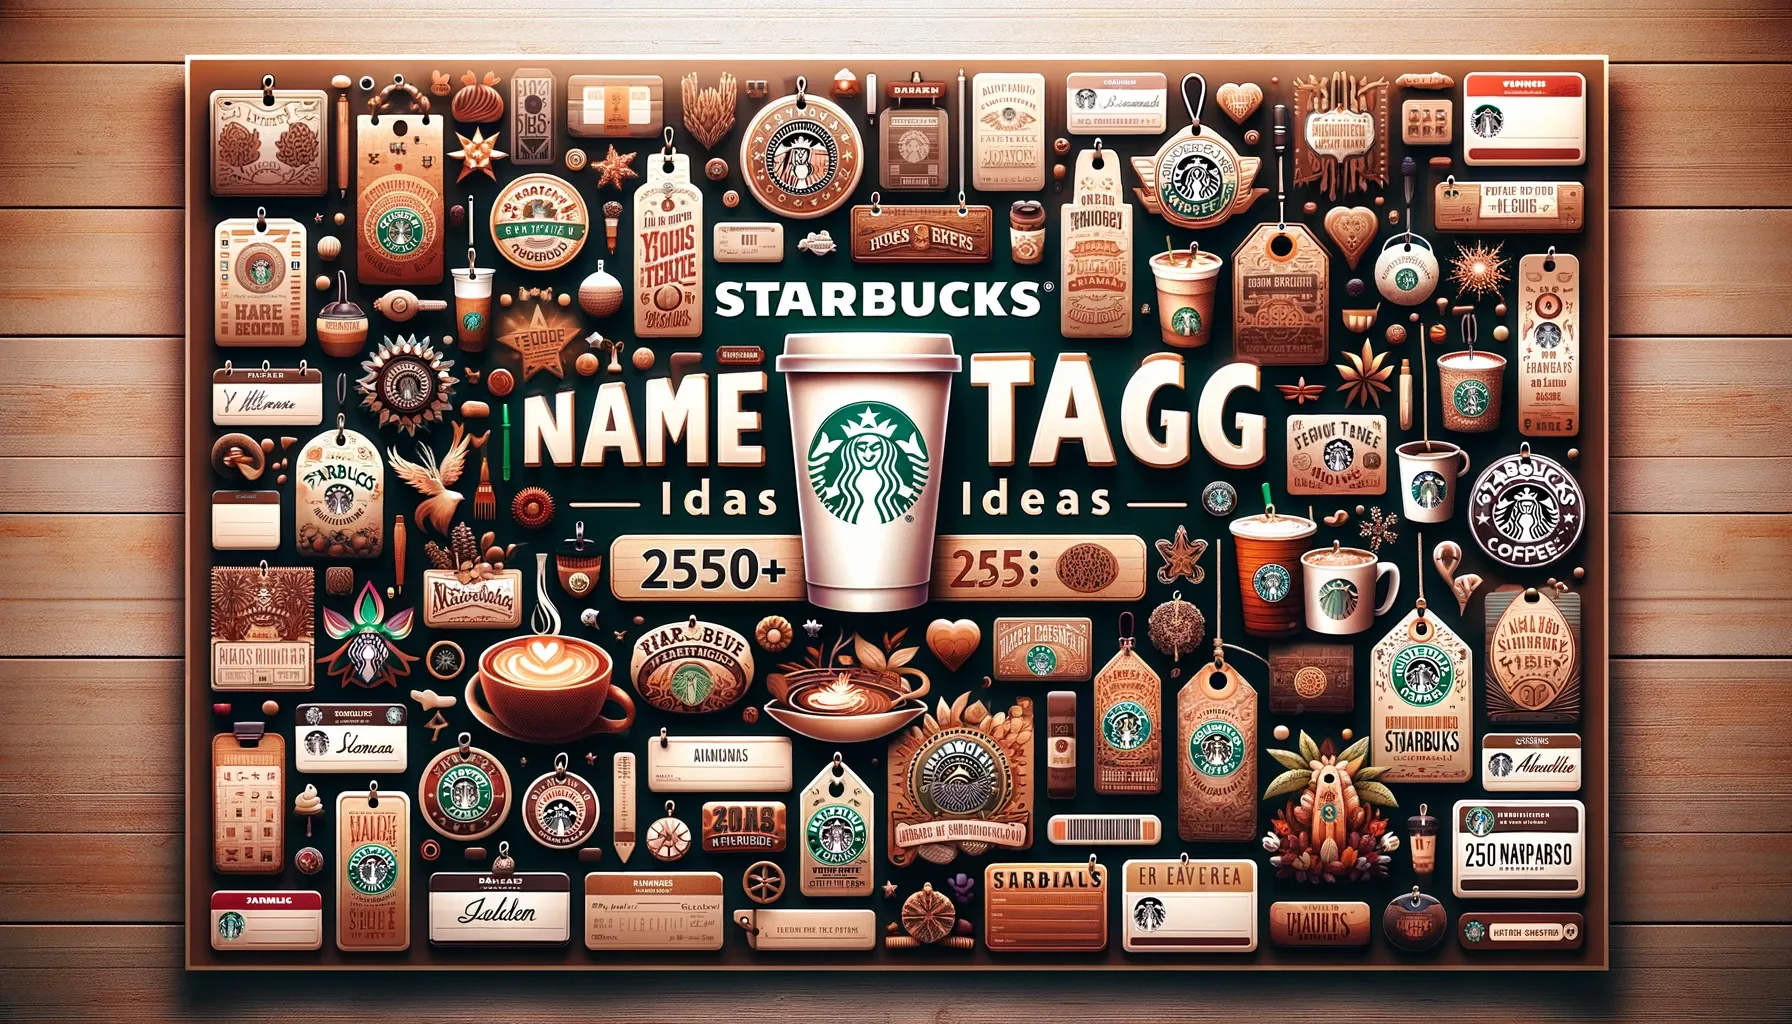 250+ Starbucks Name Tag Ideas to inspire the Customers